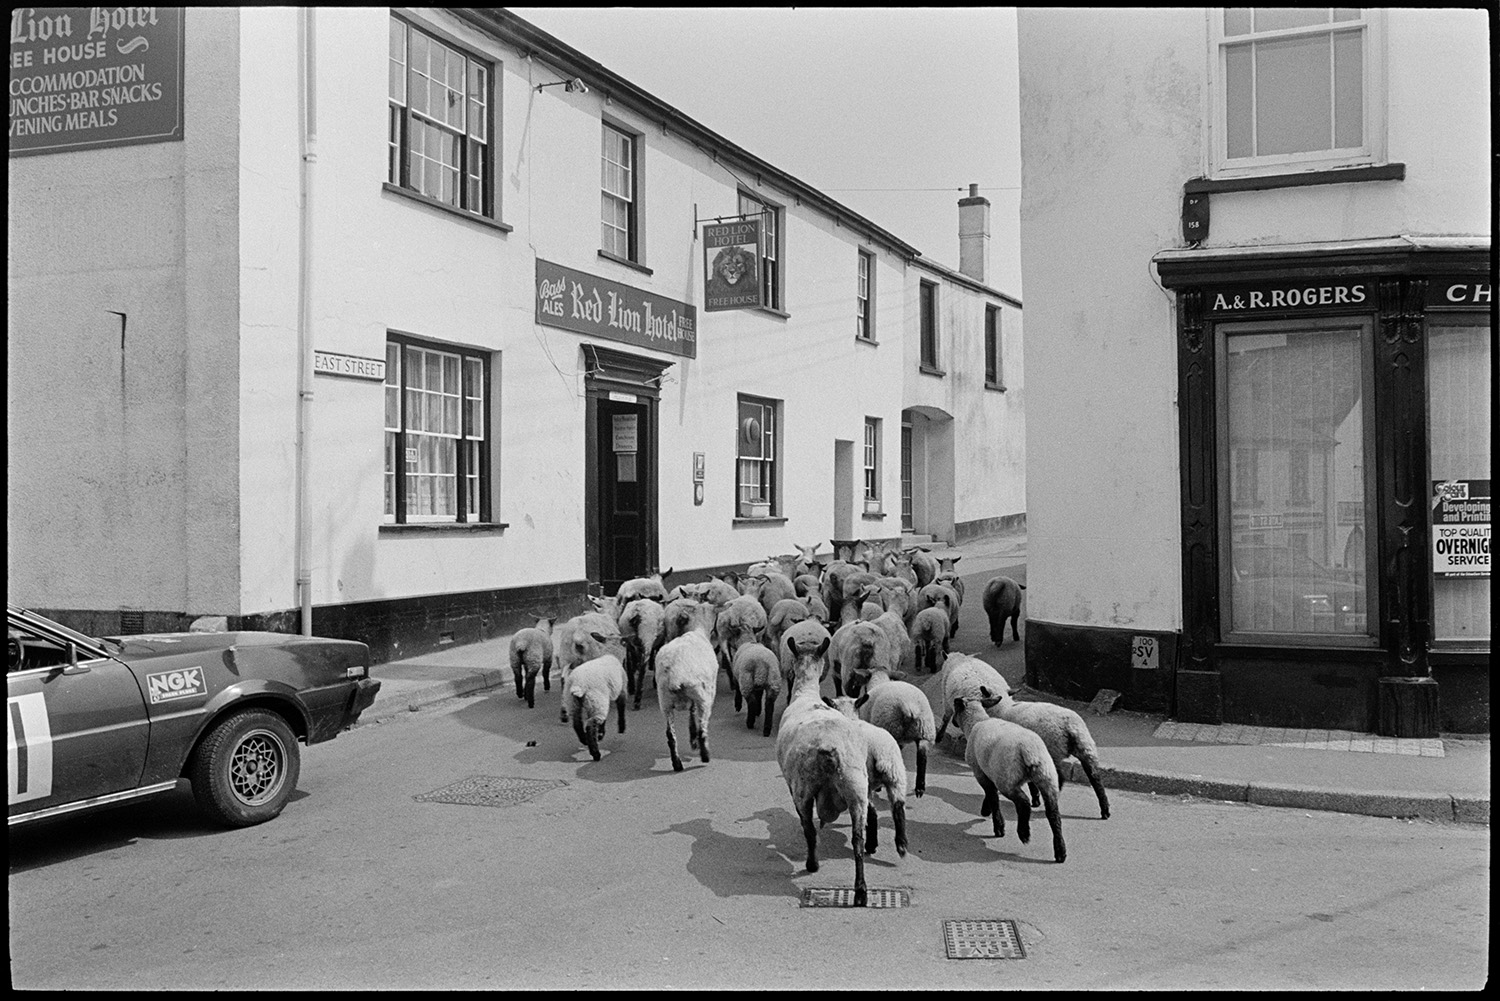 Sheep in street with Pub.
[A flock of shorn sheep with lambs walking up East Street in Chulmleigh with the Red Lion Hotel on one side of the road and the chemist A. & R. Rogers on the other. A car is waiting on the corner.]